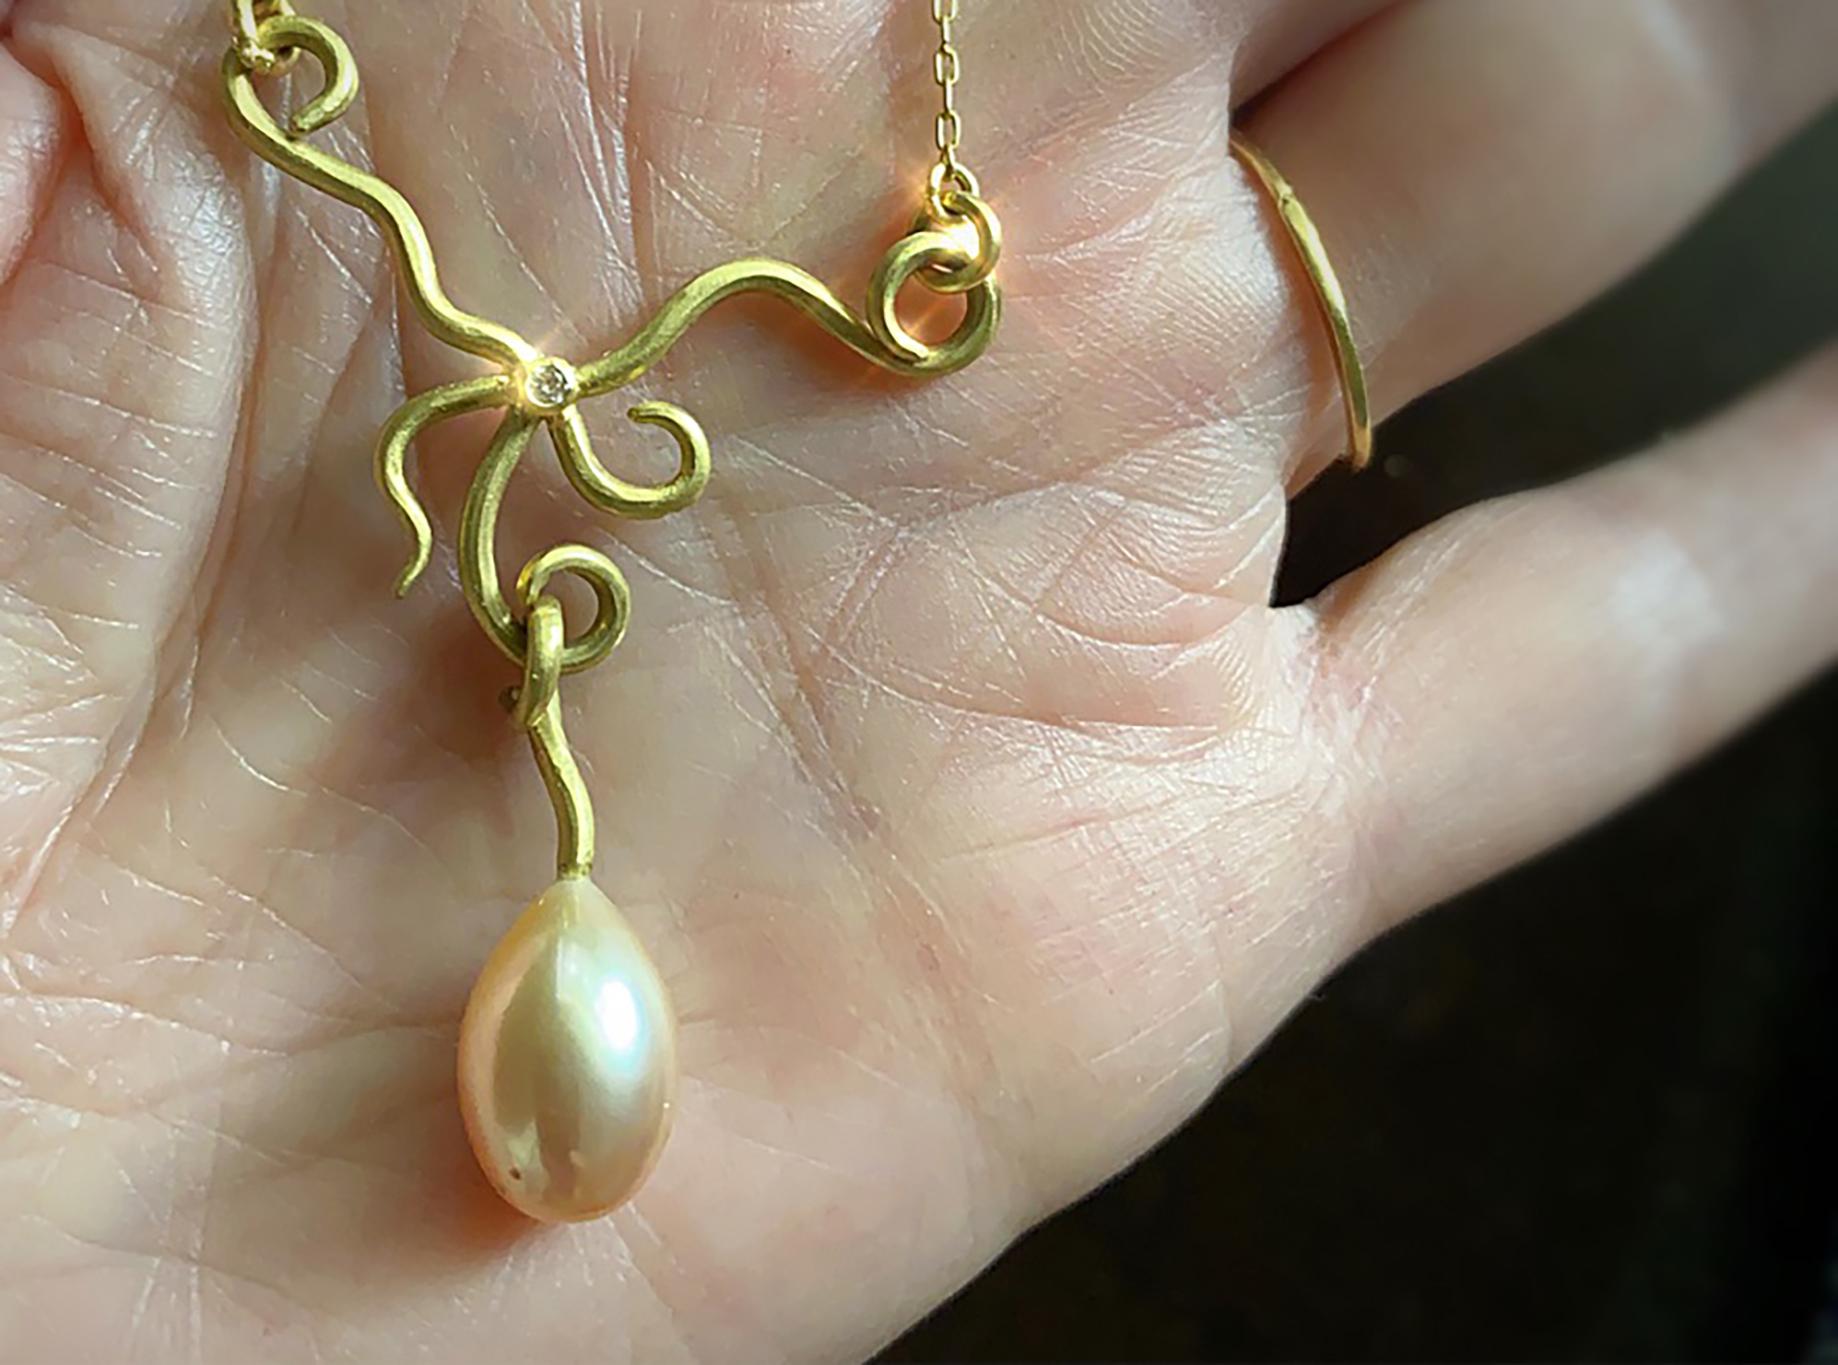 A one of a kind lavalier completely handcrafted in 18k gold featuring a beautifully hued pearl drop and a 2 mm brilliant cut diamond.  The lavalier is attached to a 17.5